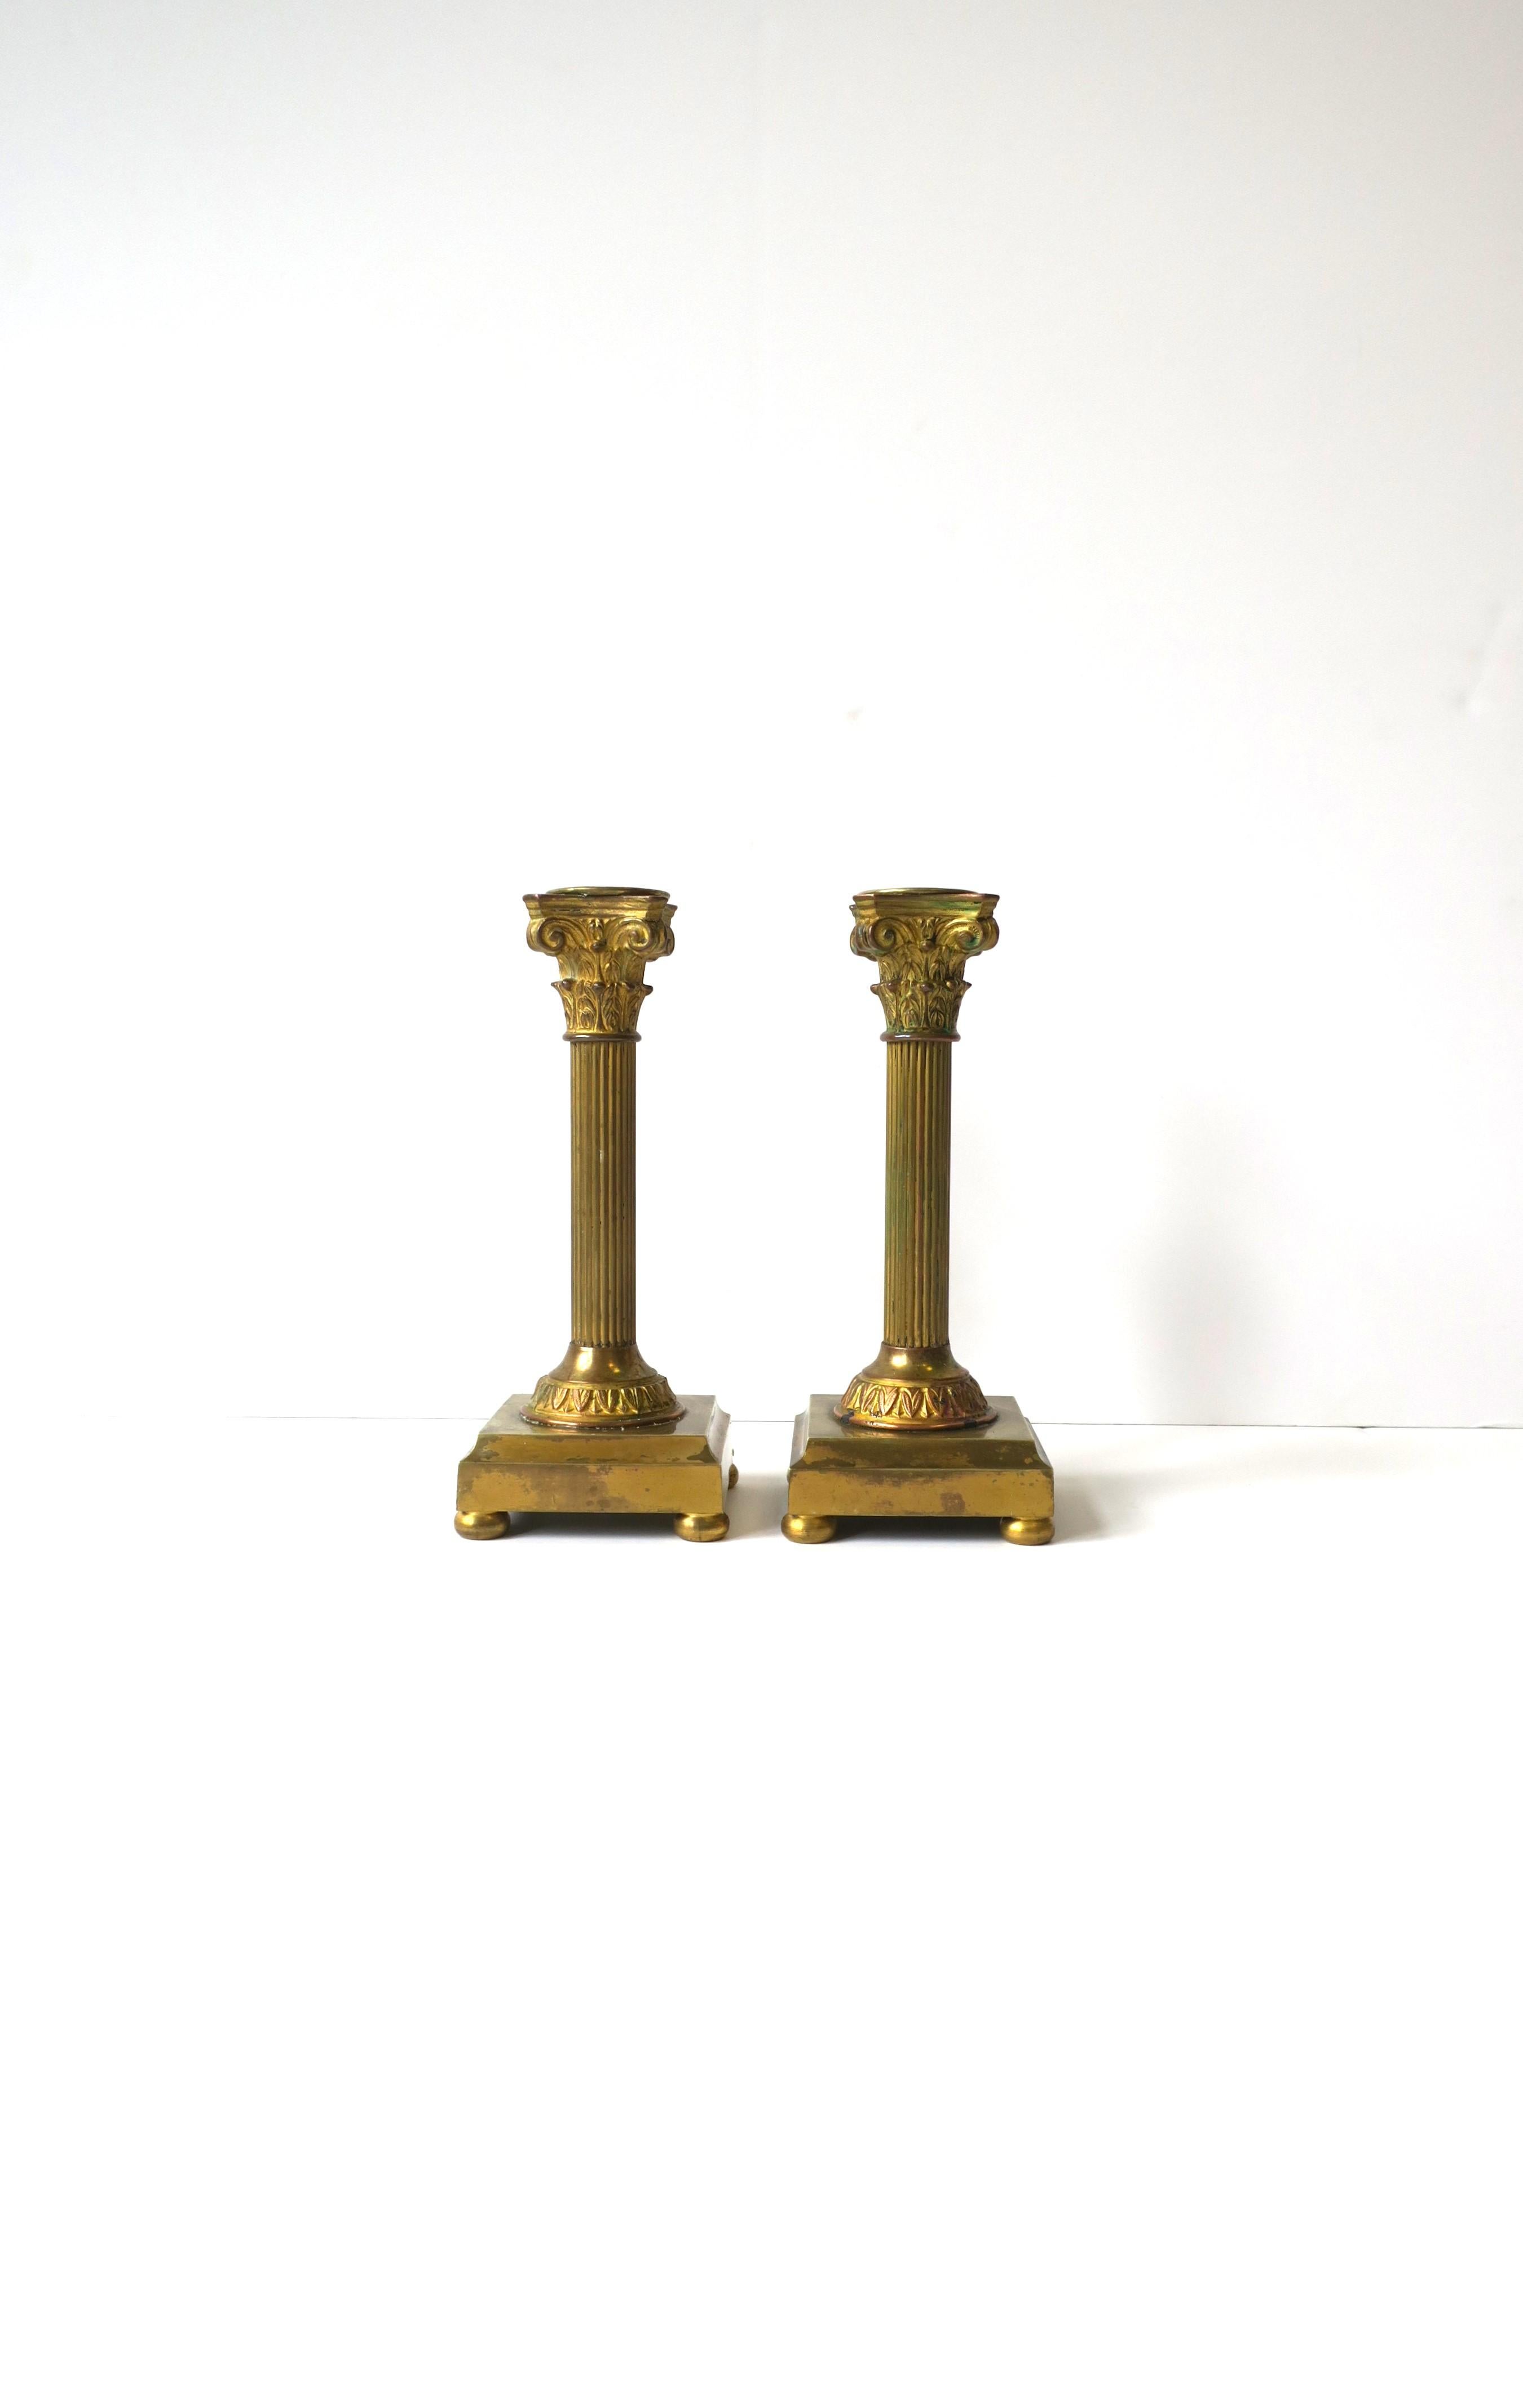 A substantial pair of French gilt bronze Corinthian column candlestick holders in the Neoclassical style, circa late-19th century, France. Candlesticks depict the Corinthian column, made of bronze with a copper, brass and gold gilt overlay, square